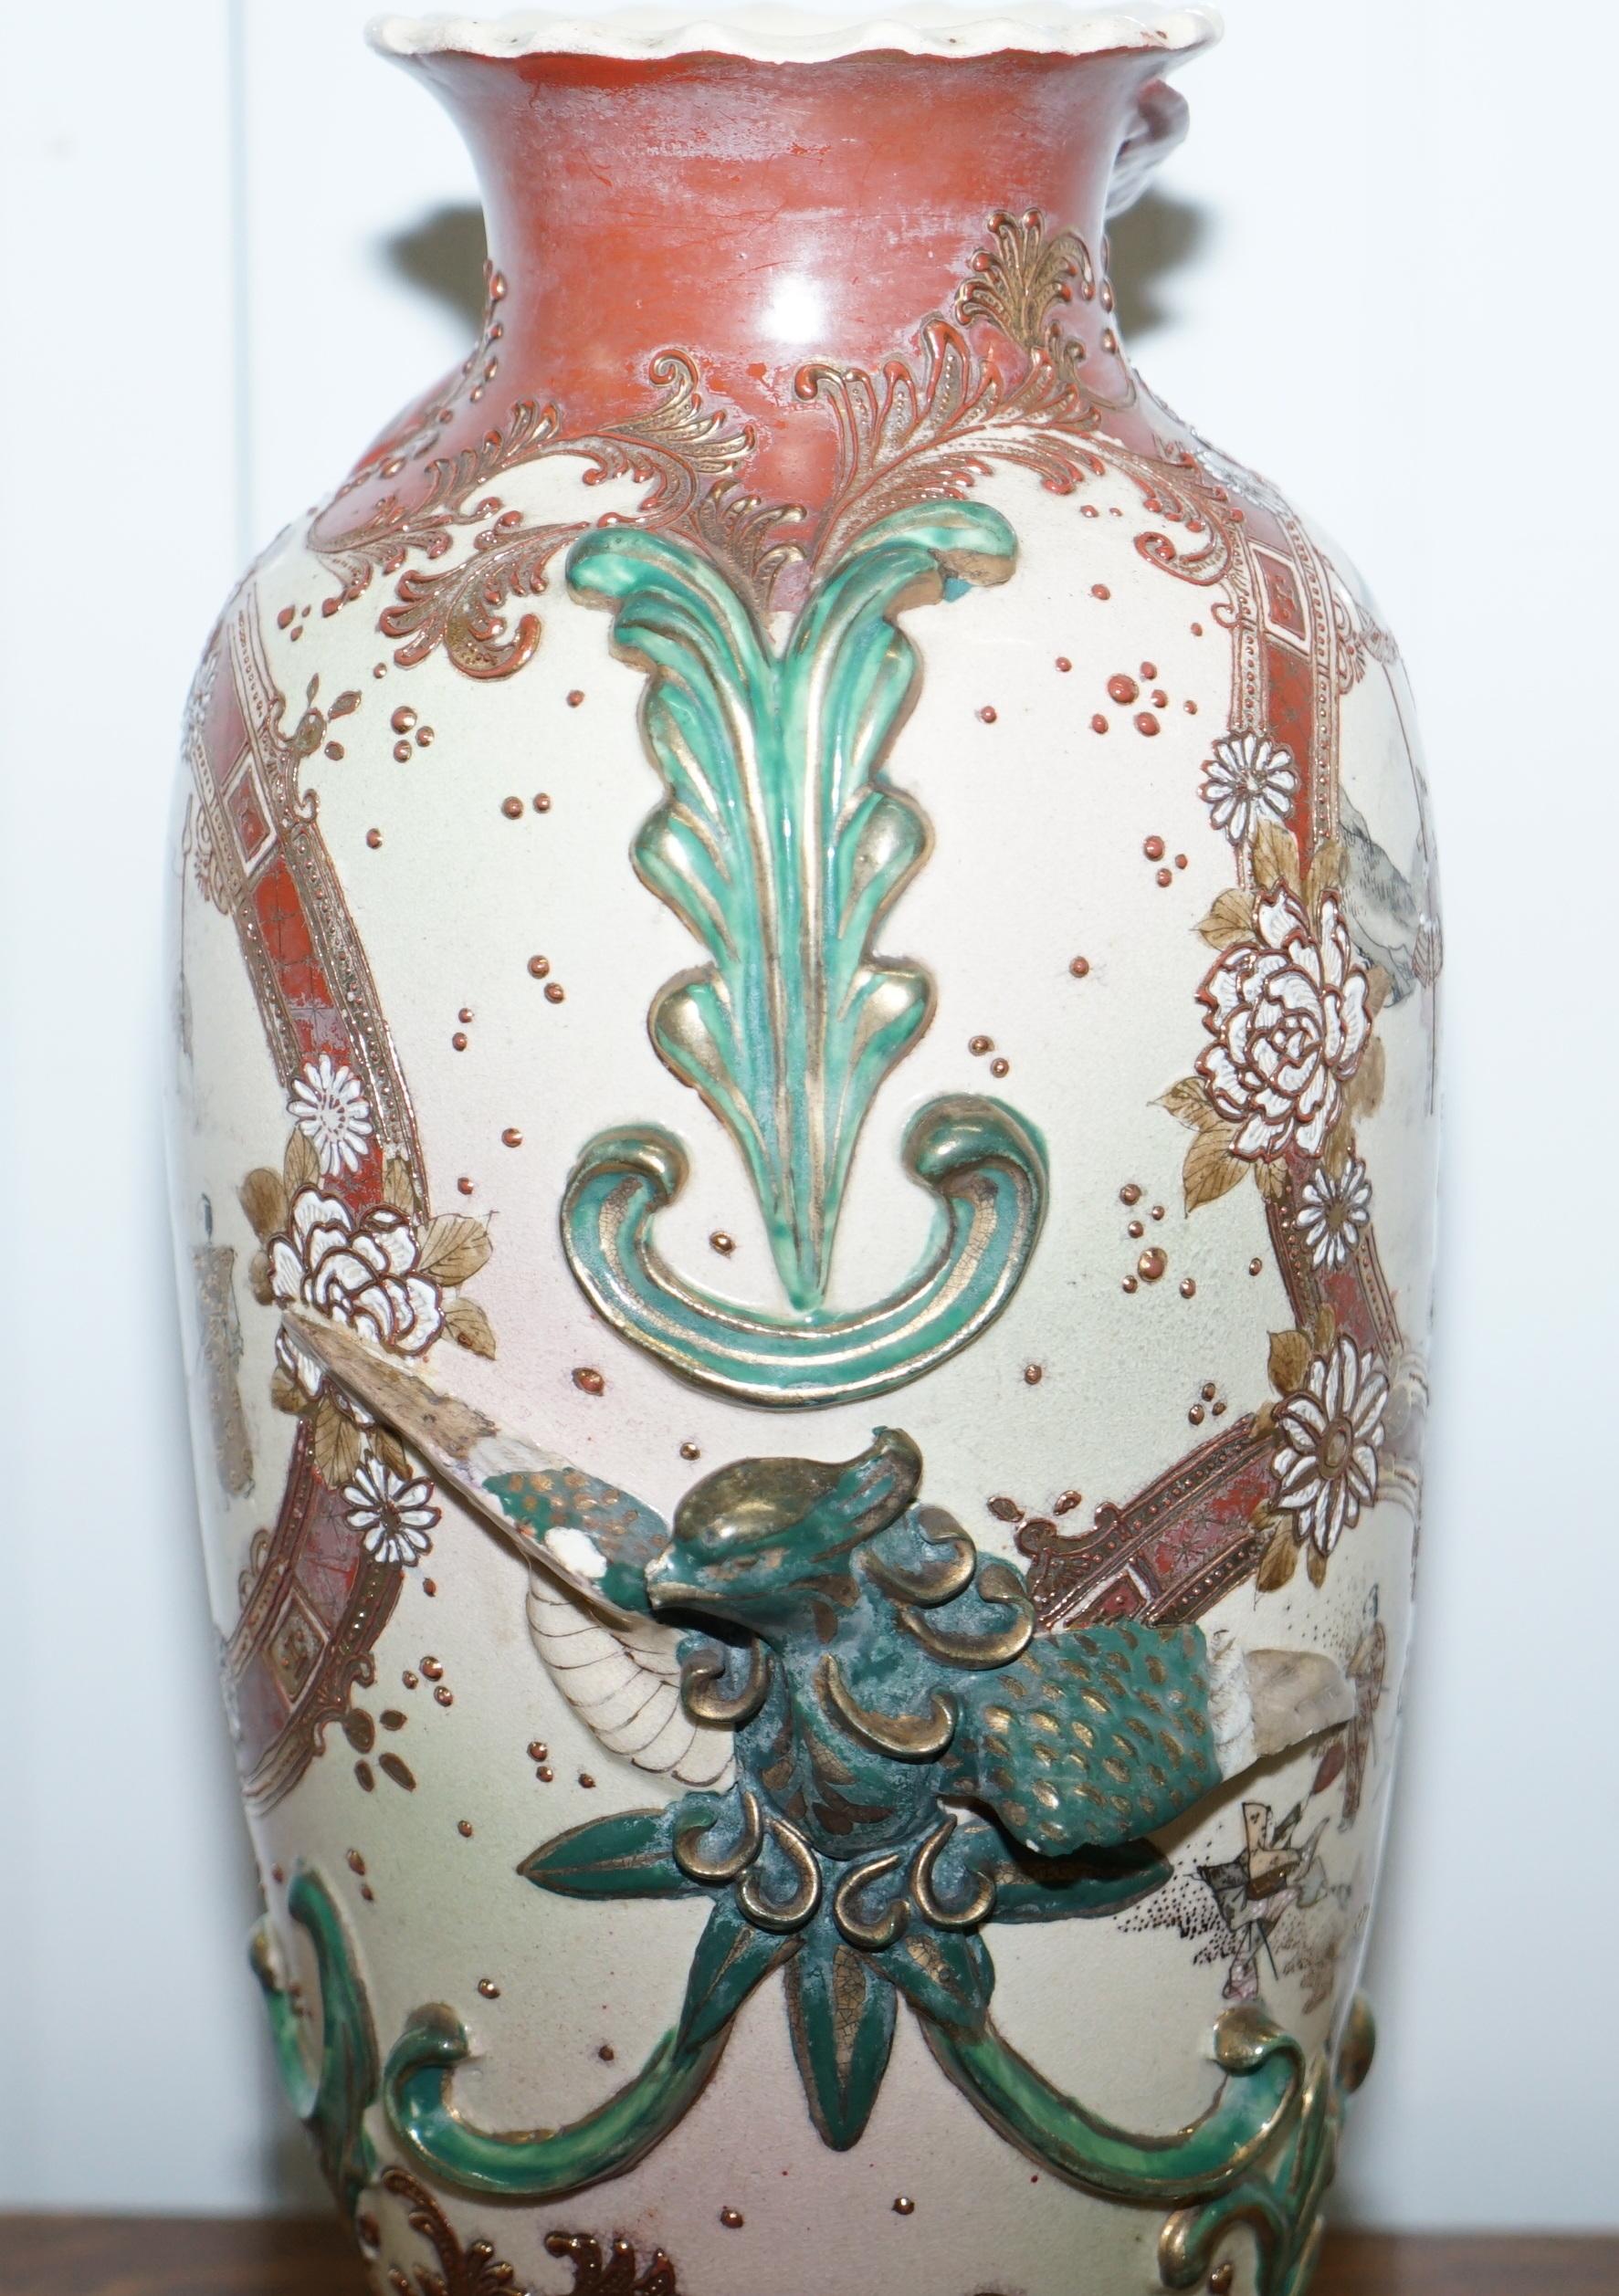 ornate vases with intricate designs